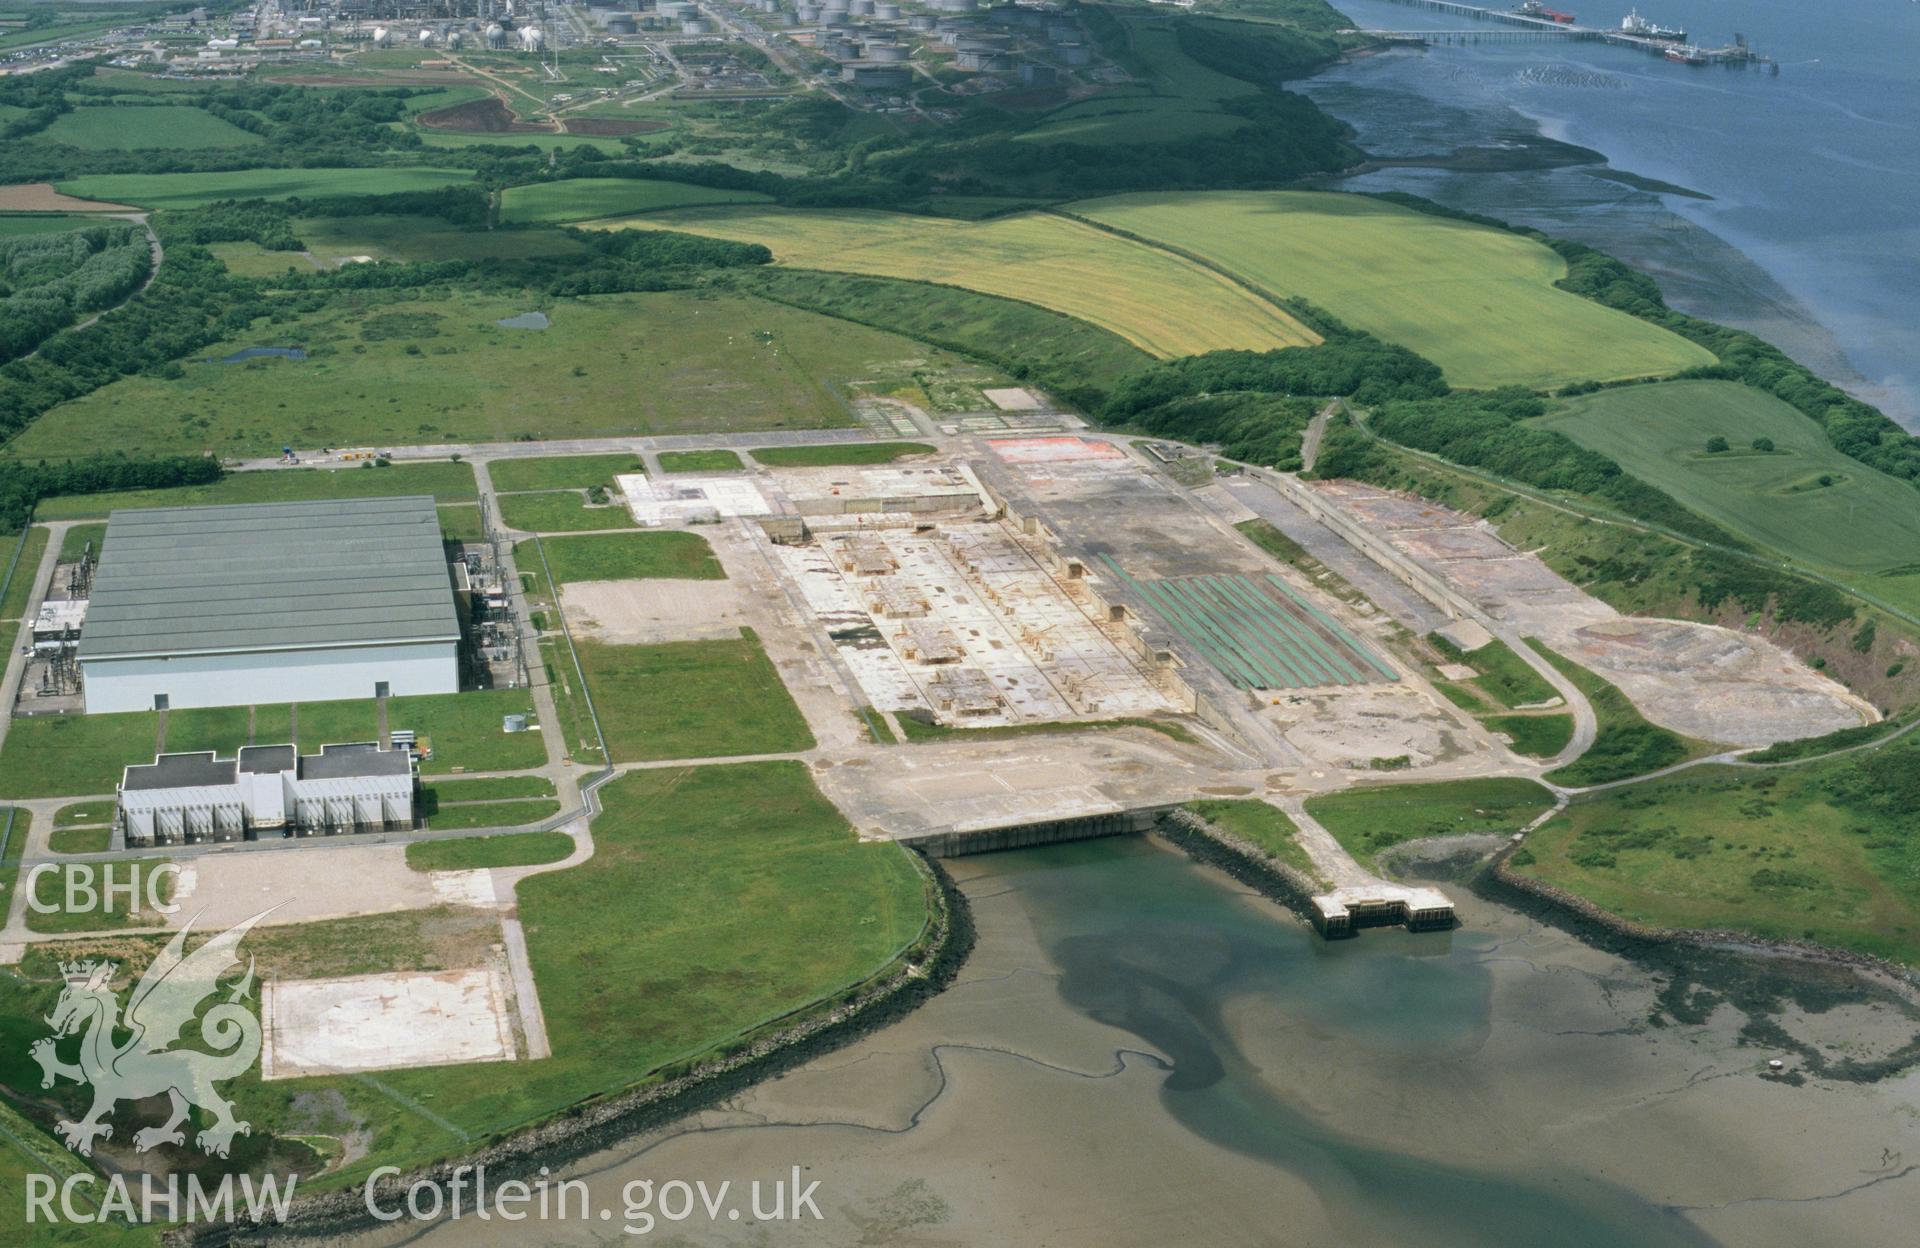 RCAHMW colour oblique aerial photograph of Pembroke Power Station, reduced to foundations. Taken by Toby Driver on 13/06/2003